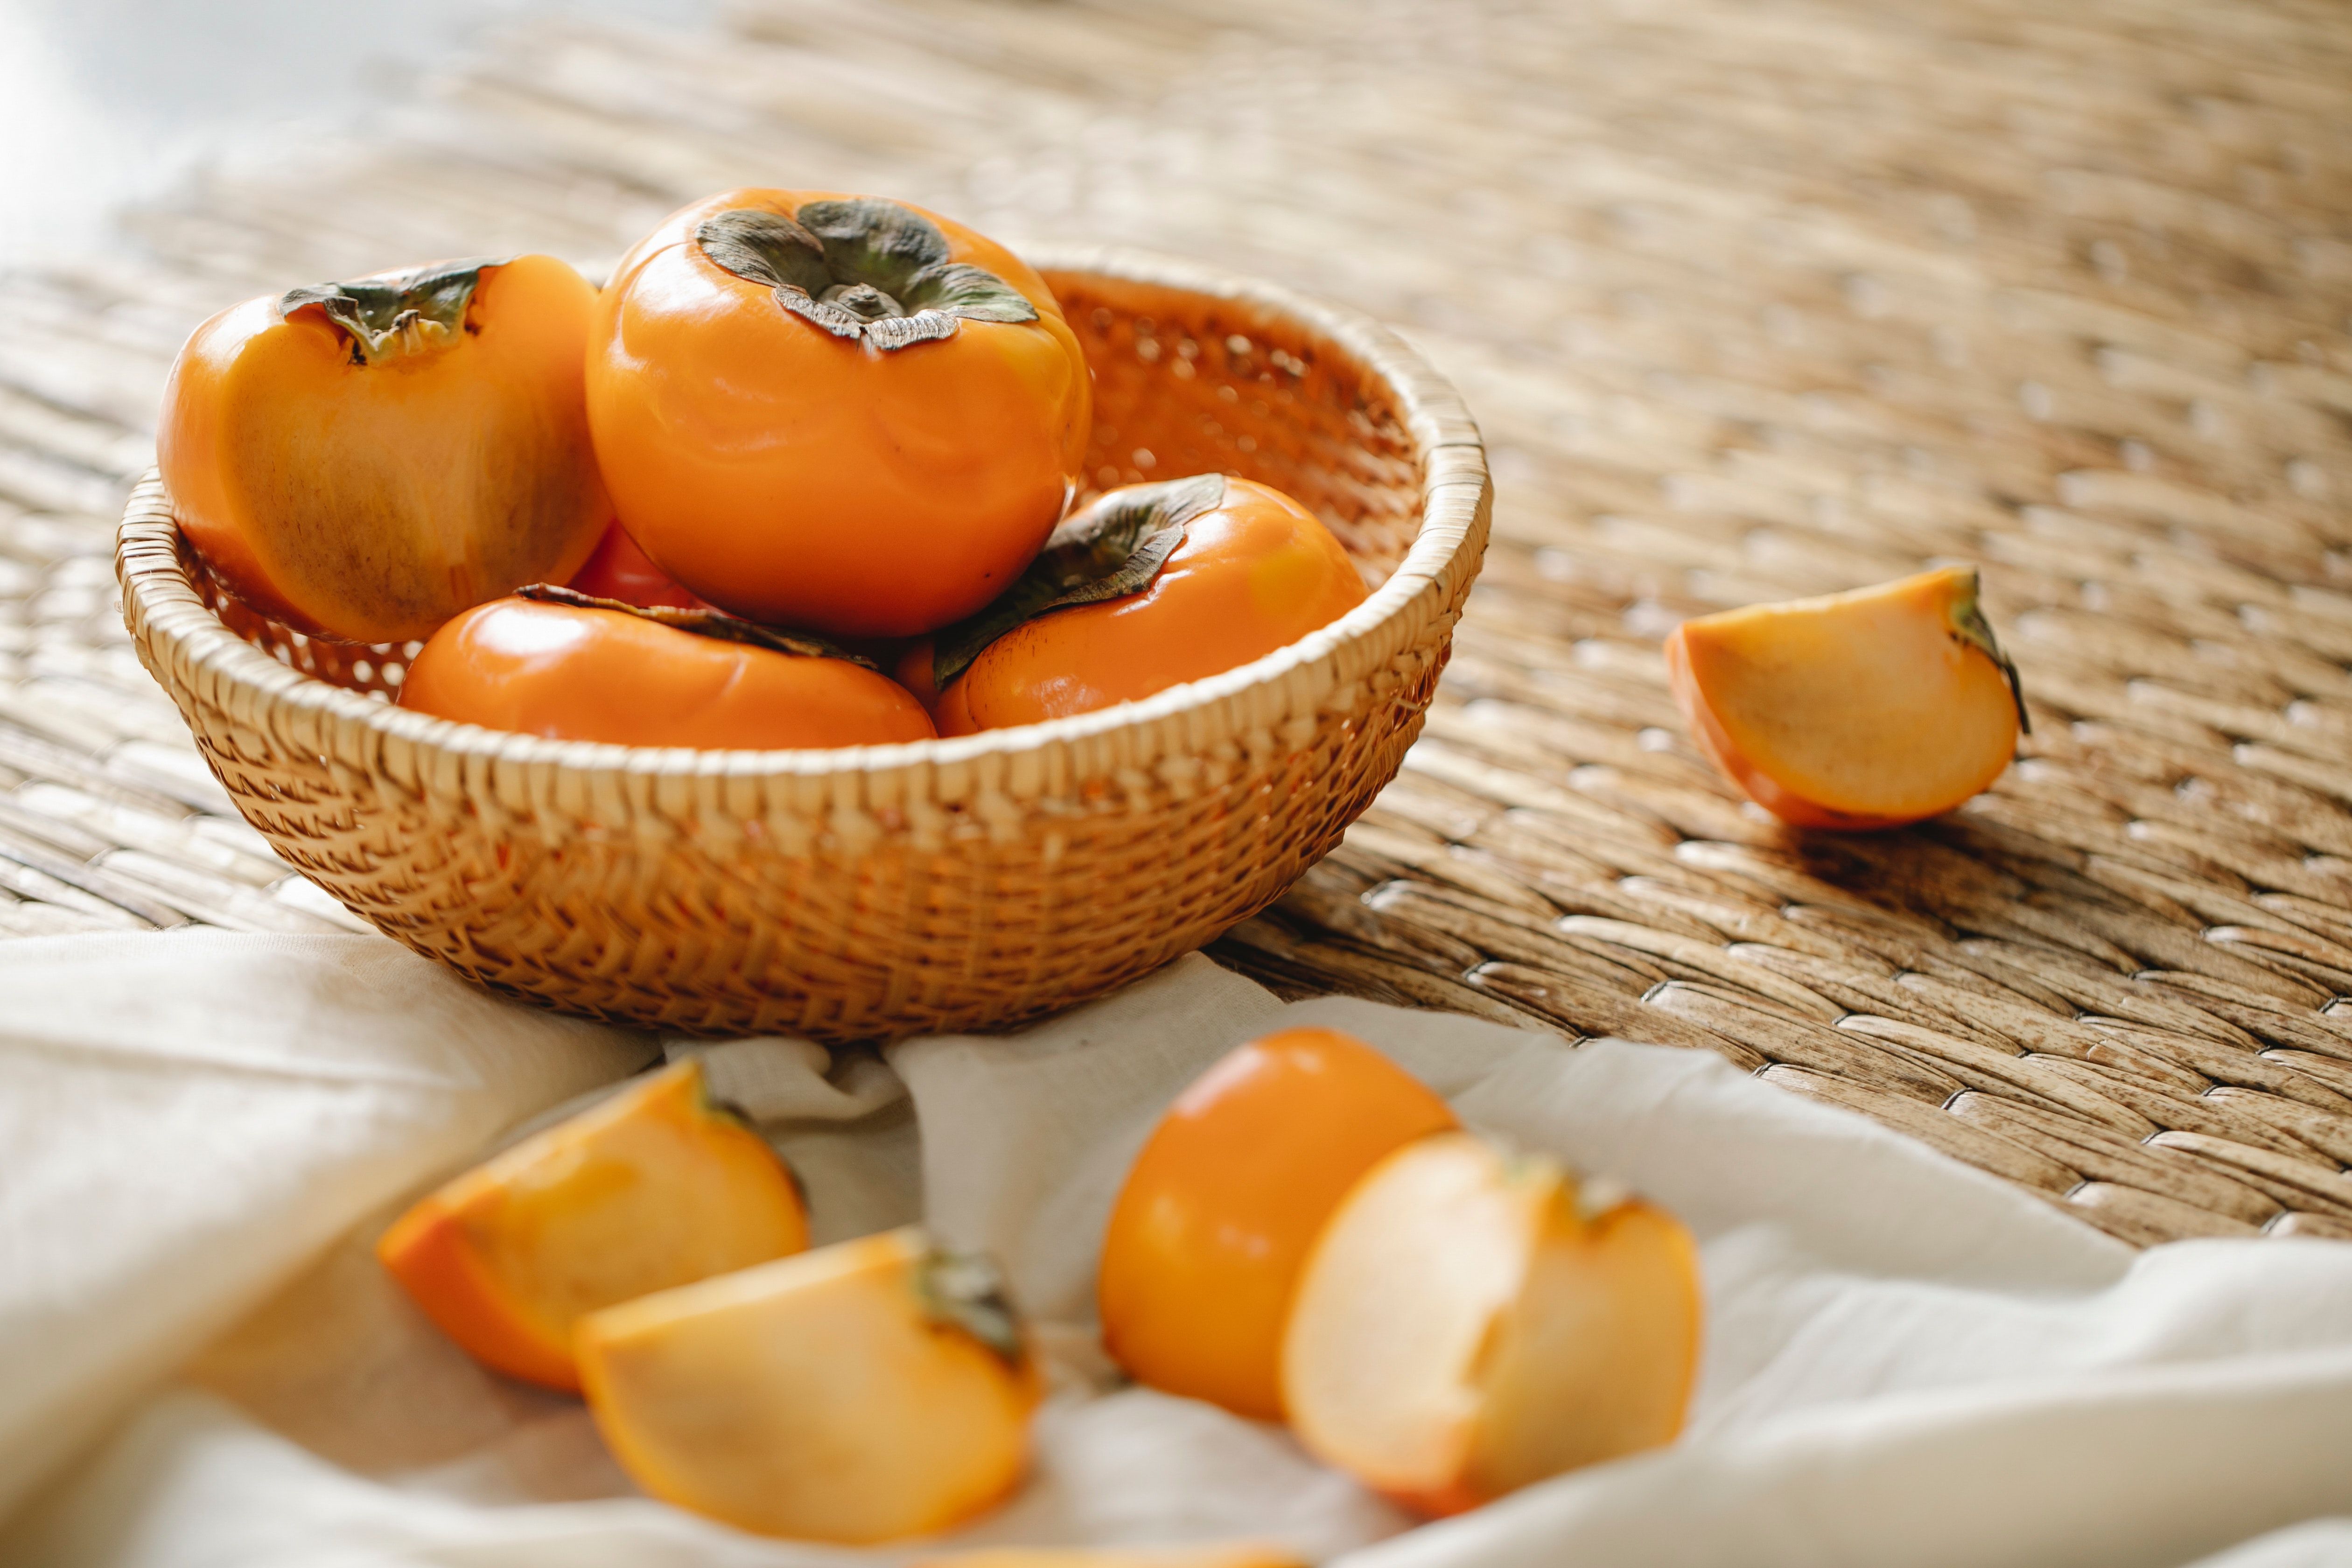 What good are Persimmons?